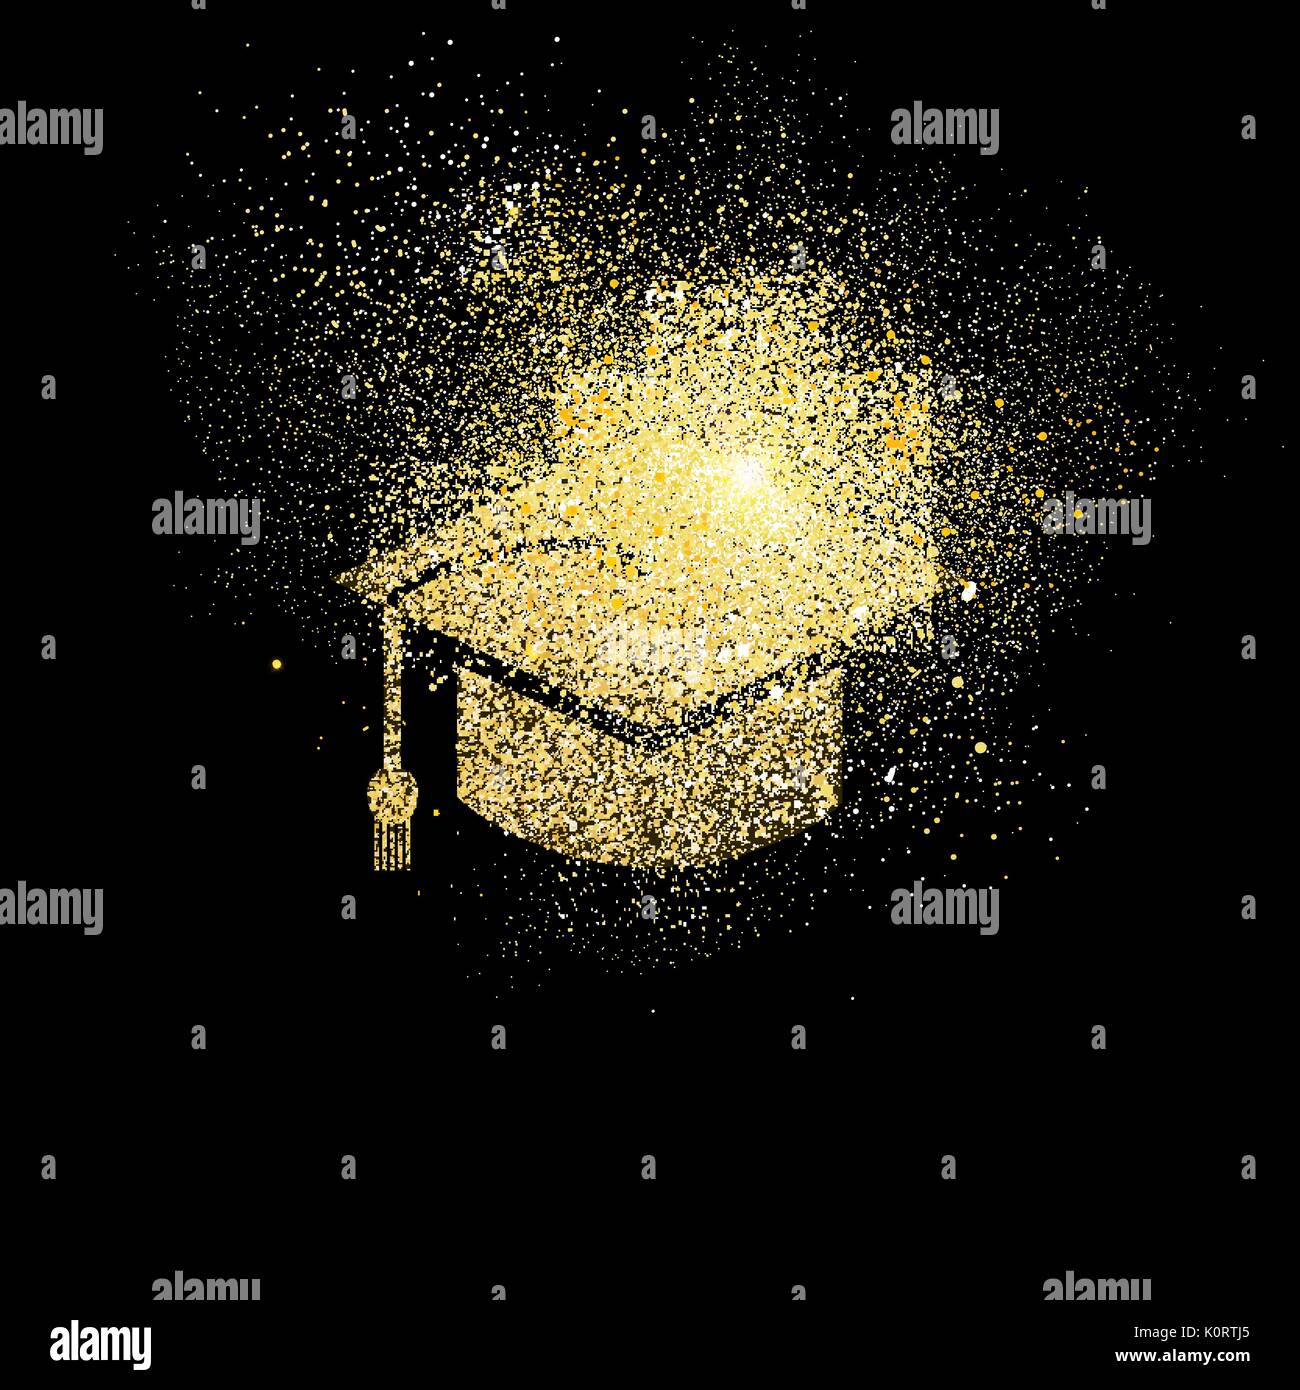 Graduation cap symbol concept illustration, gold college student icon made of realistic golden glitter dust on black background. EPS10 vector. Stock Vector